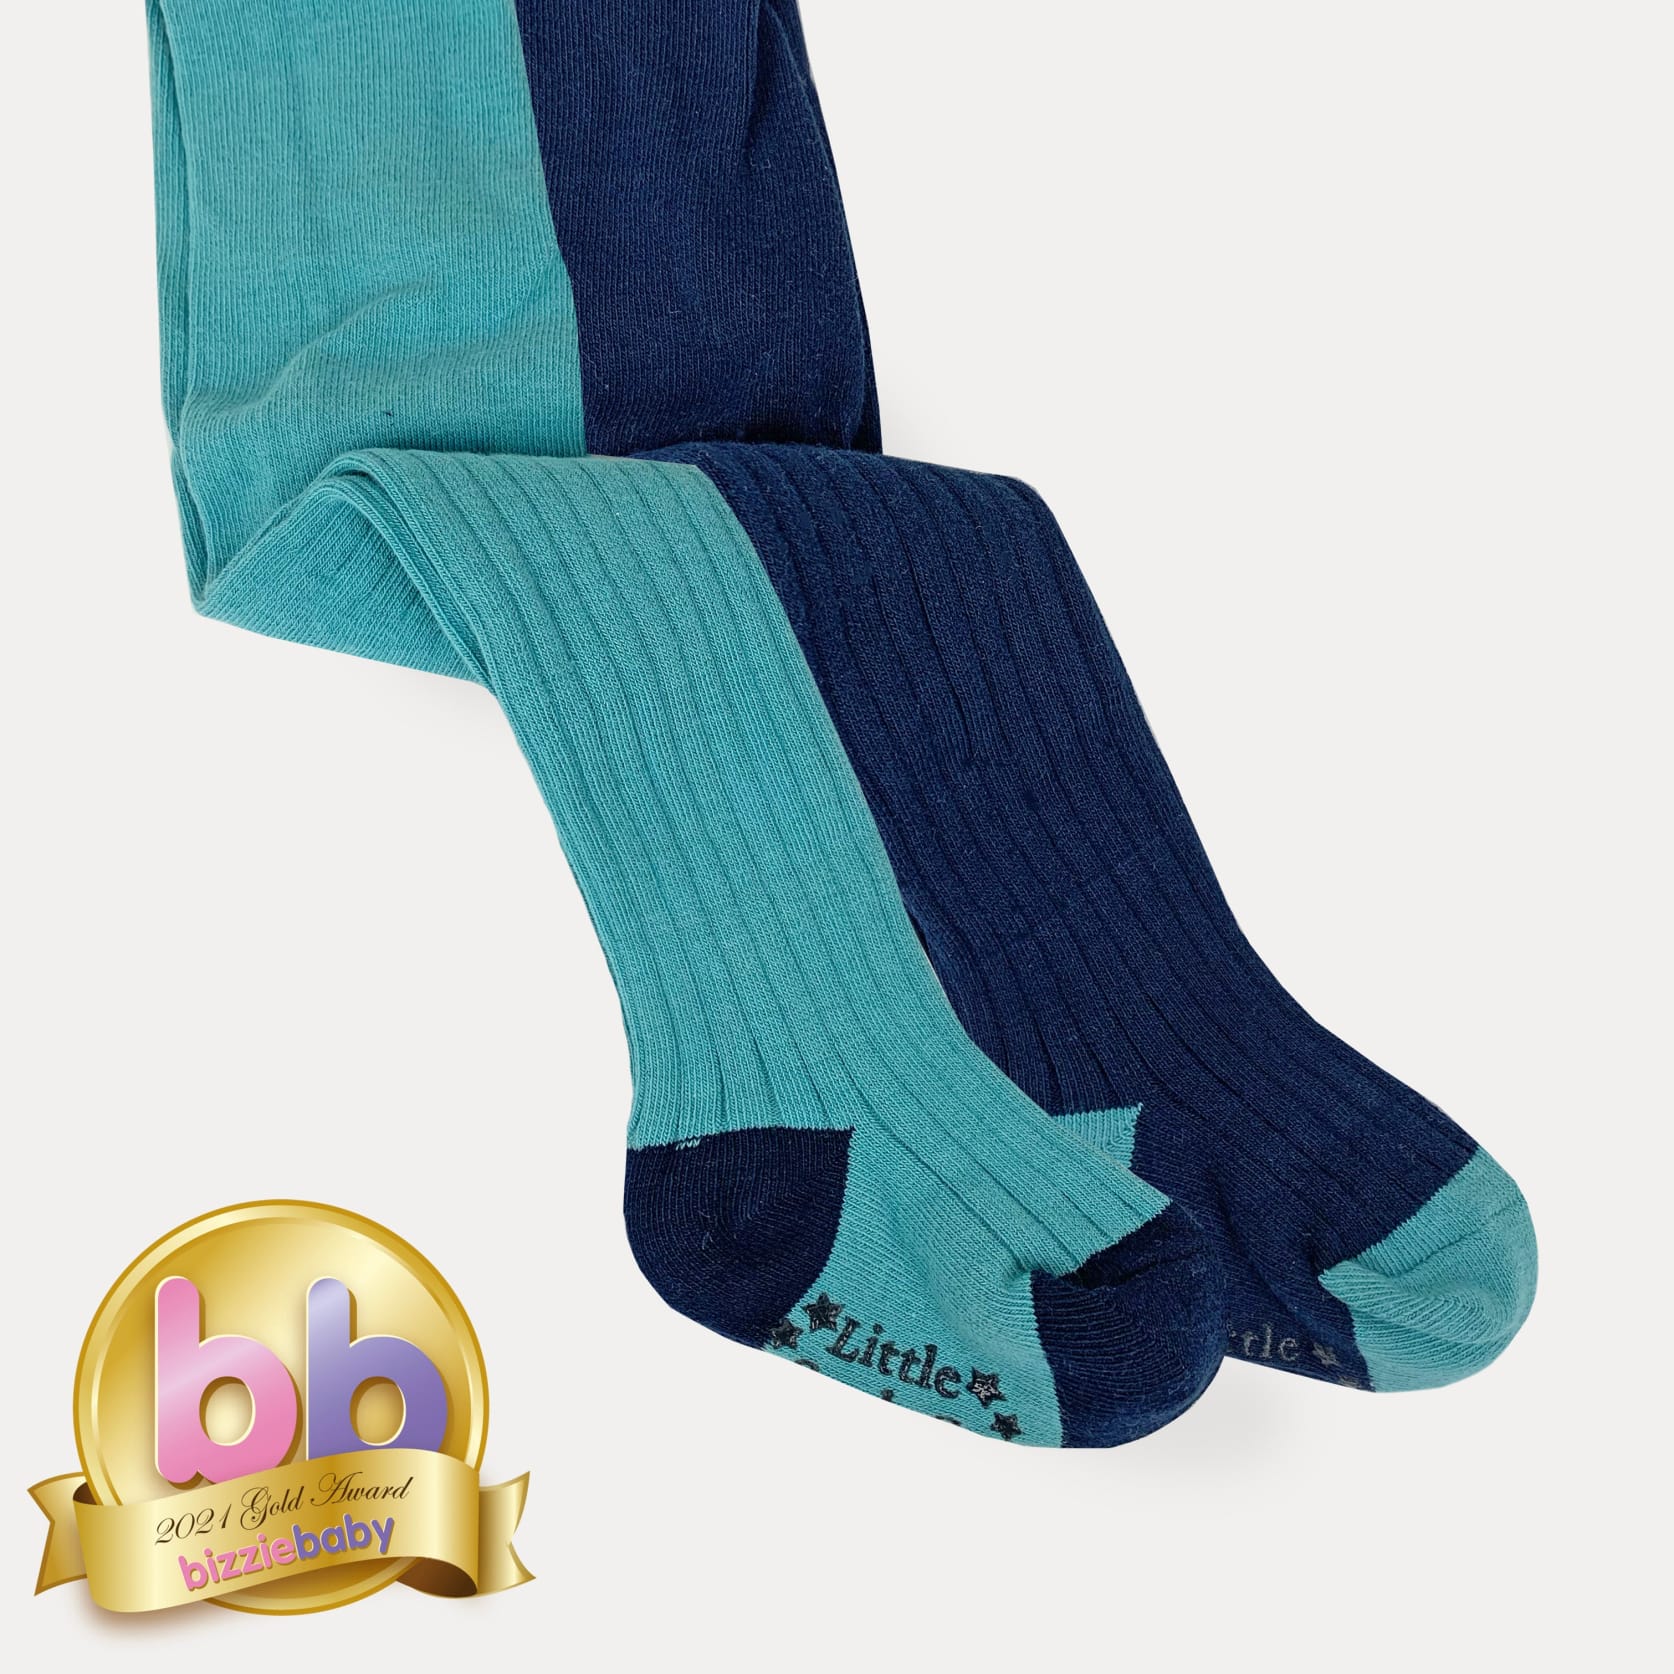 Non-Slip Super Soft Ribbed Baby and Toddler Tights - 2 Pack in Aqua & Navy